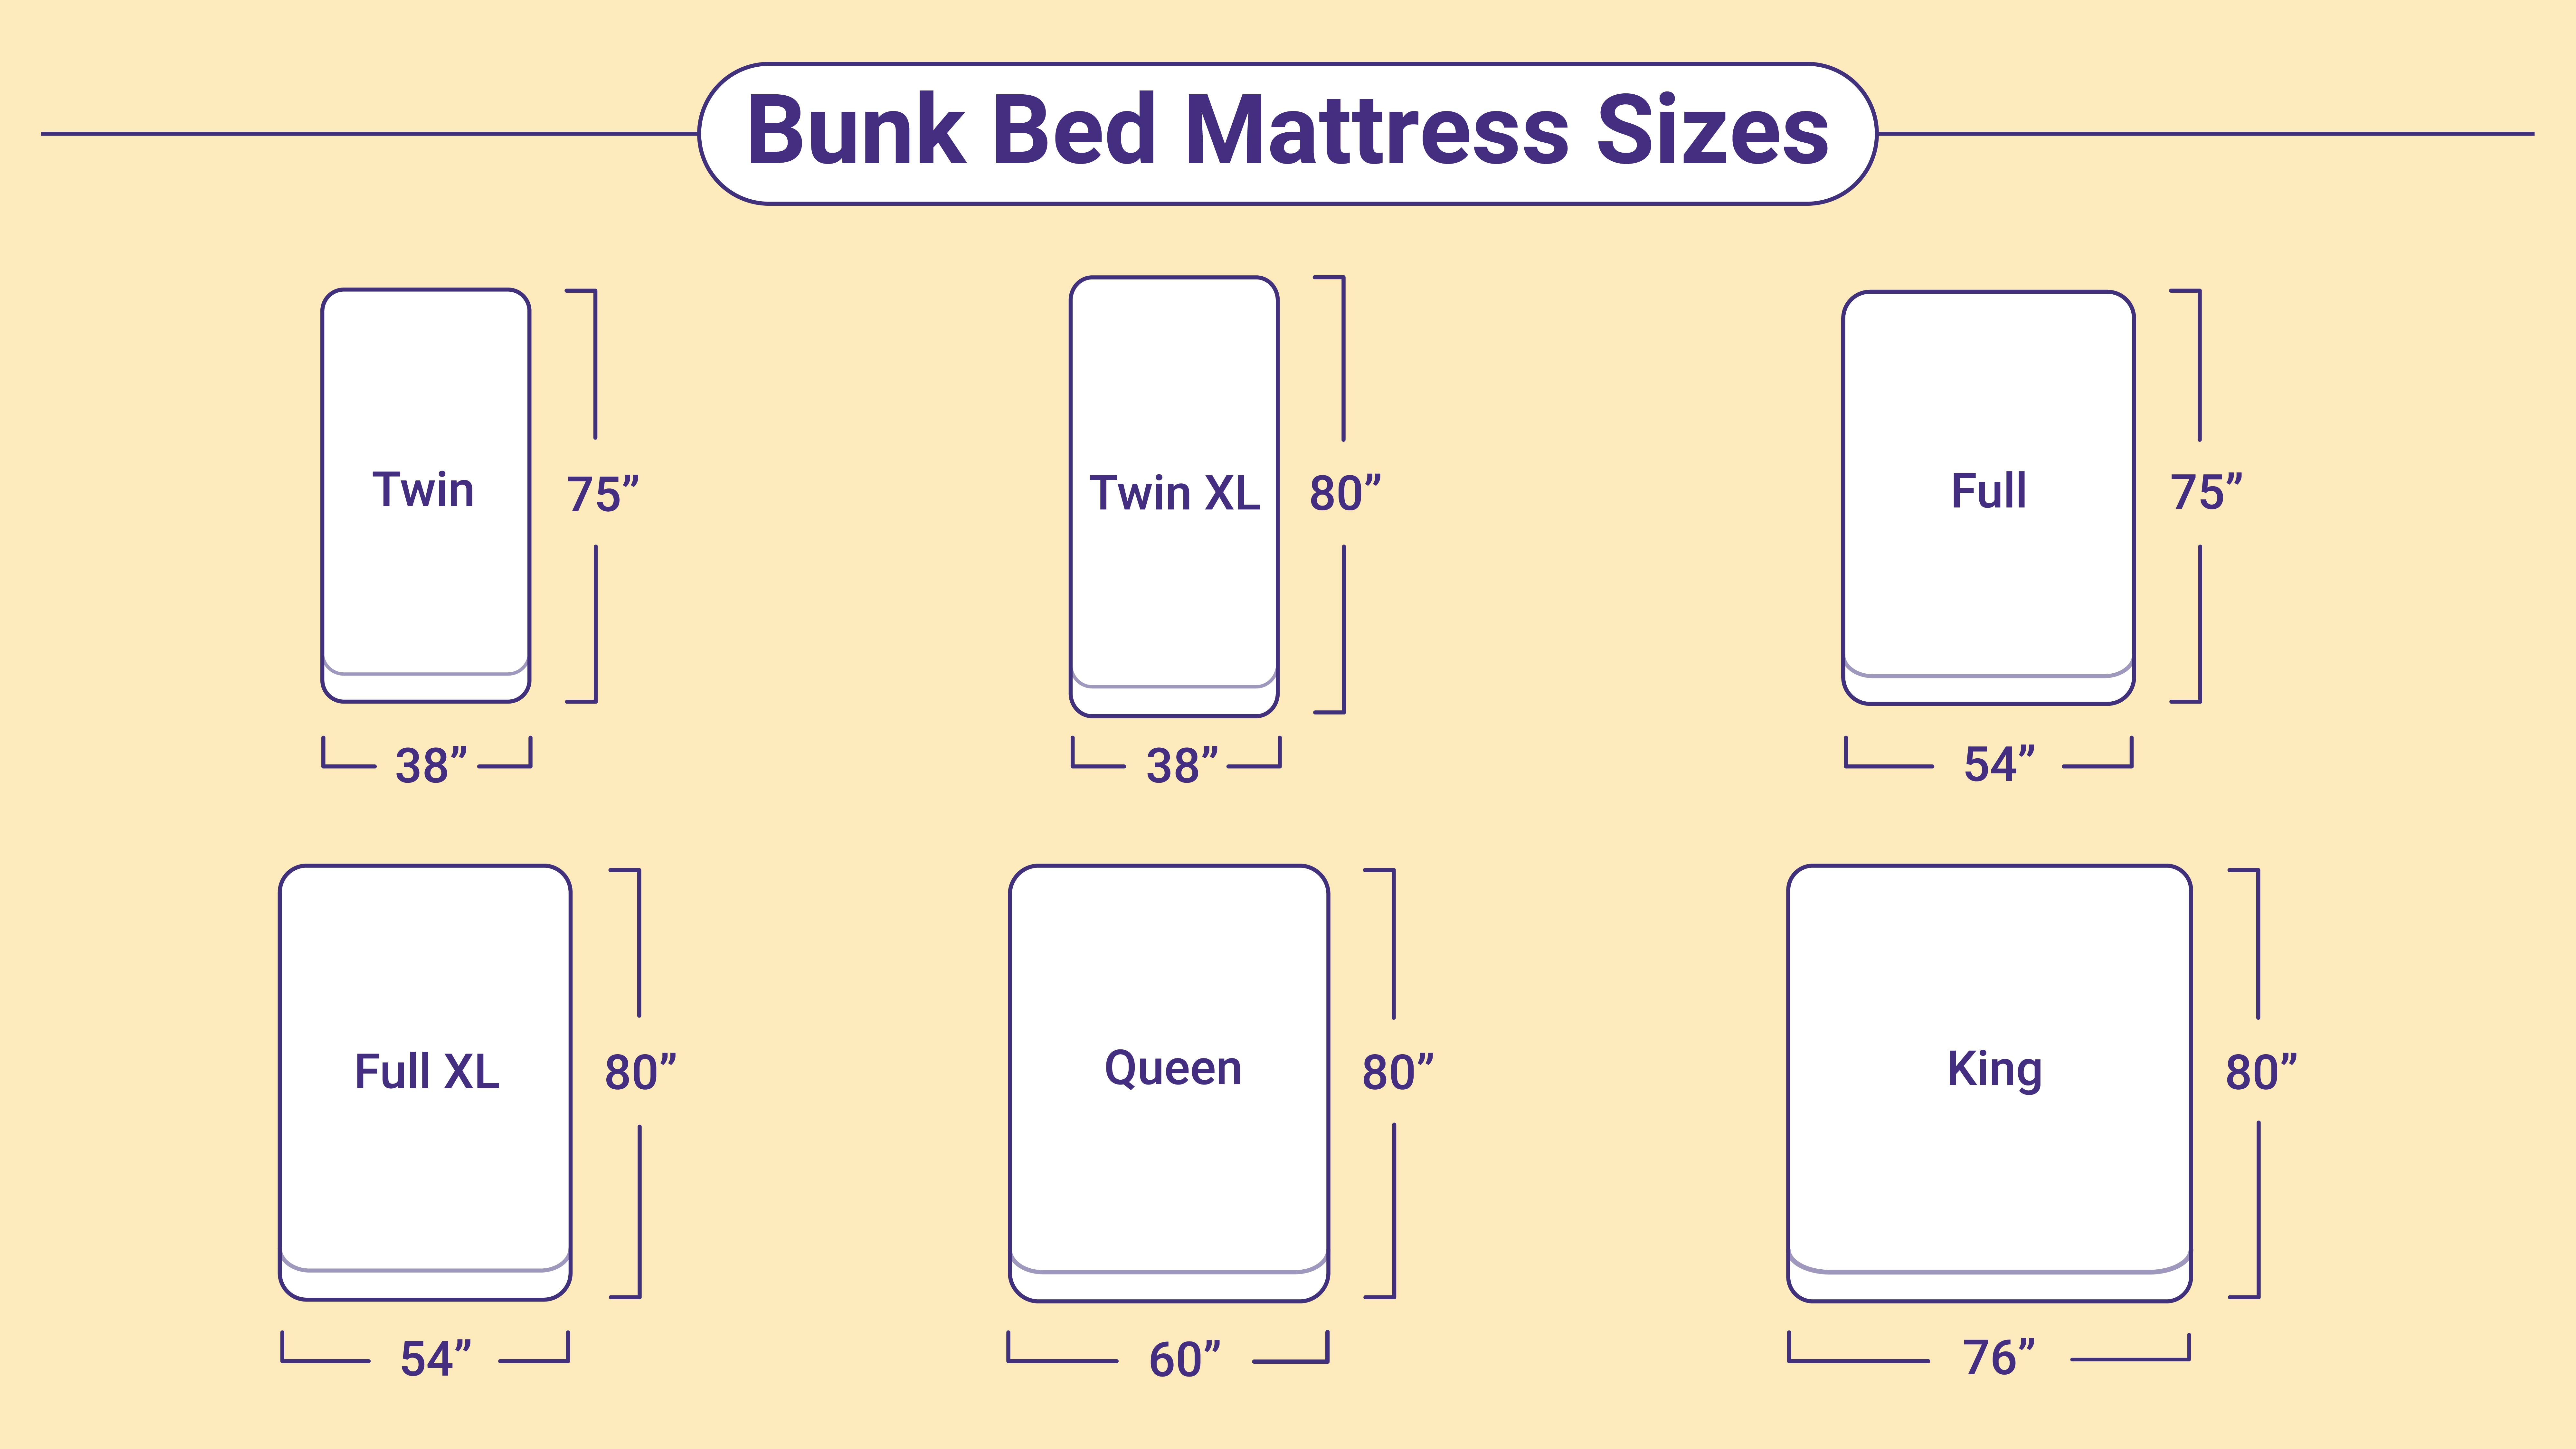 Bunk Bed Mattress Sizes And Dimensions, Bunk Bed Height Dimensions